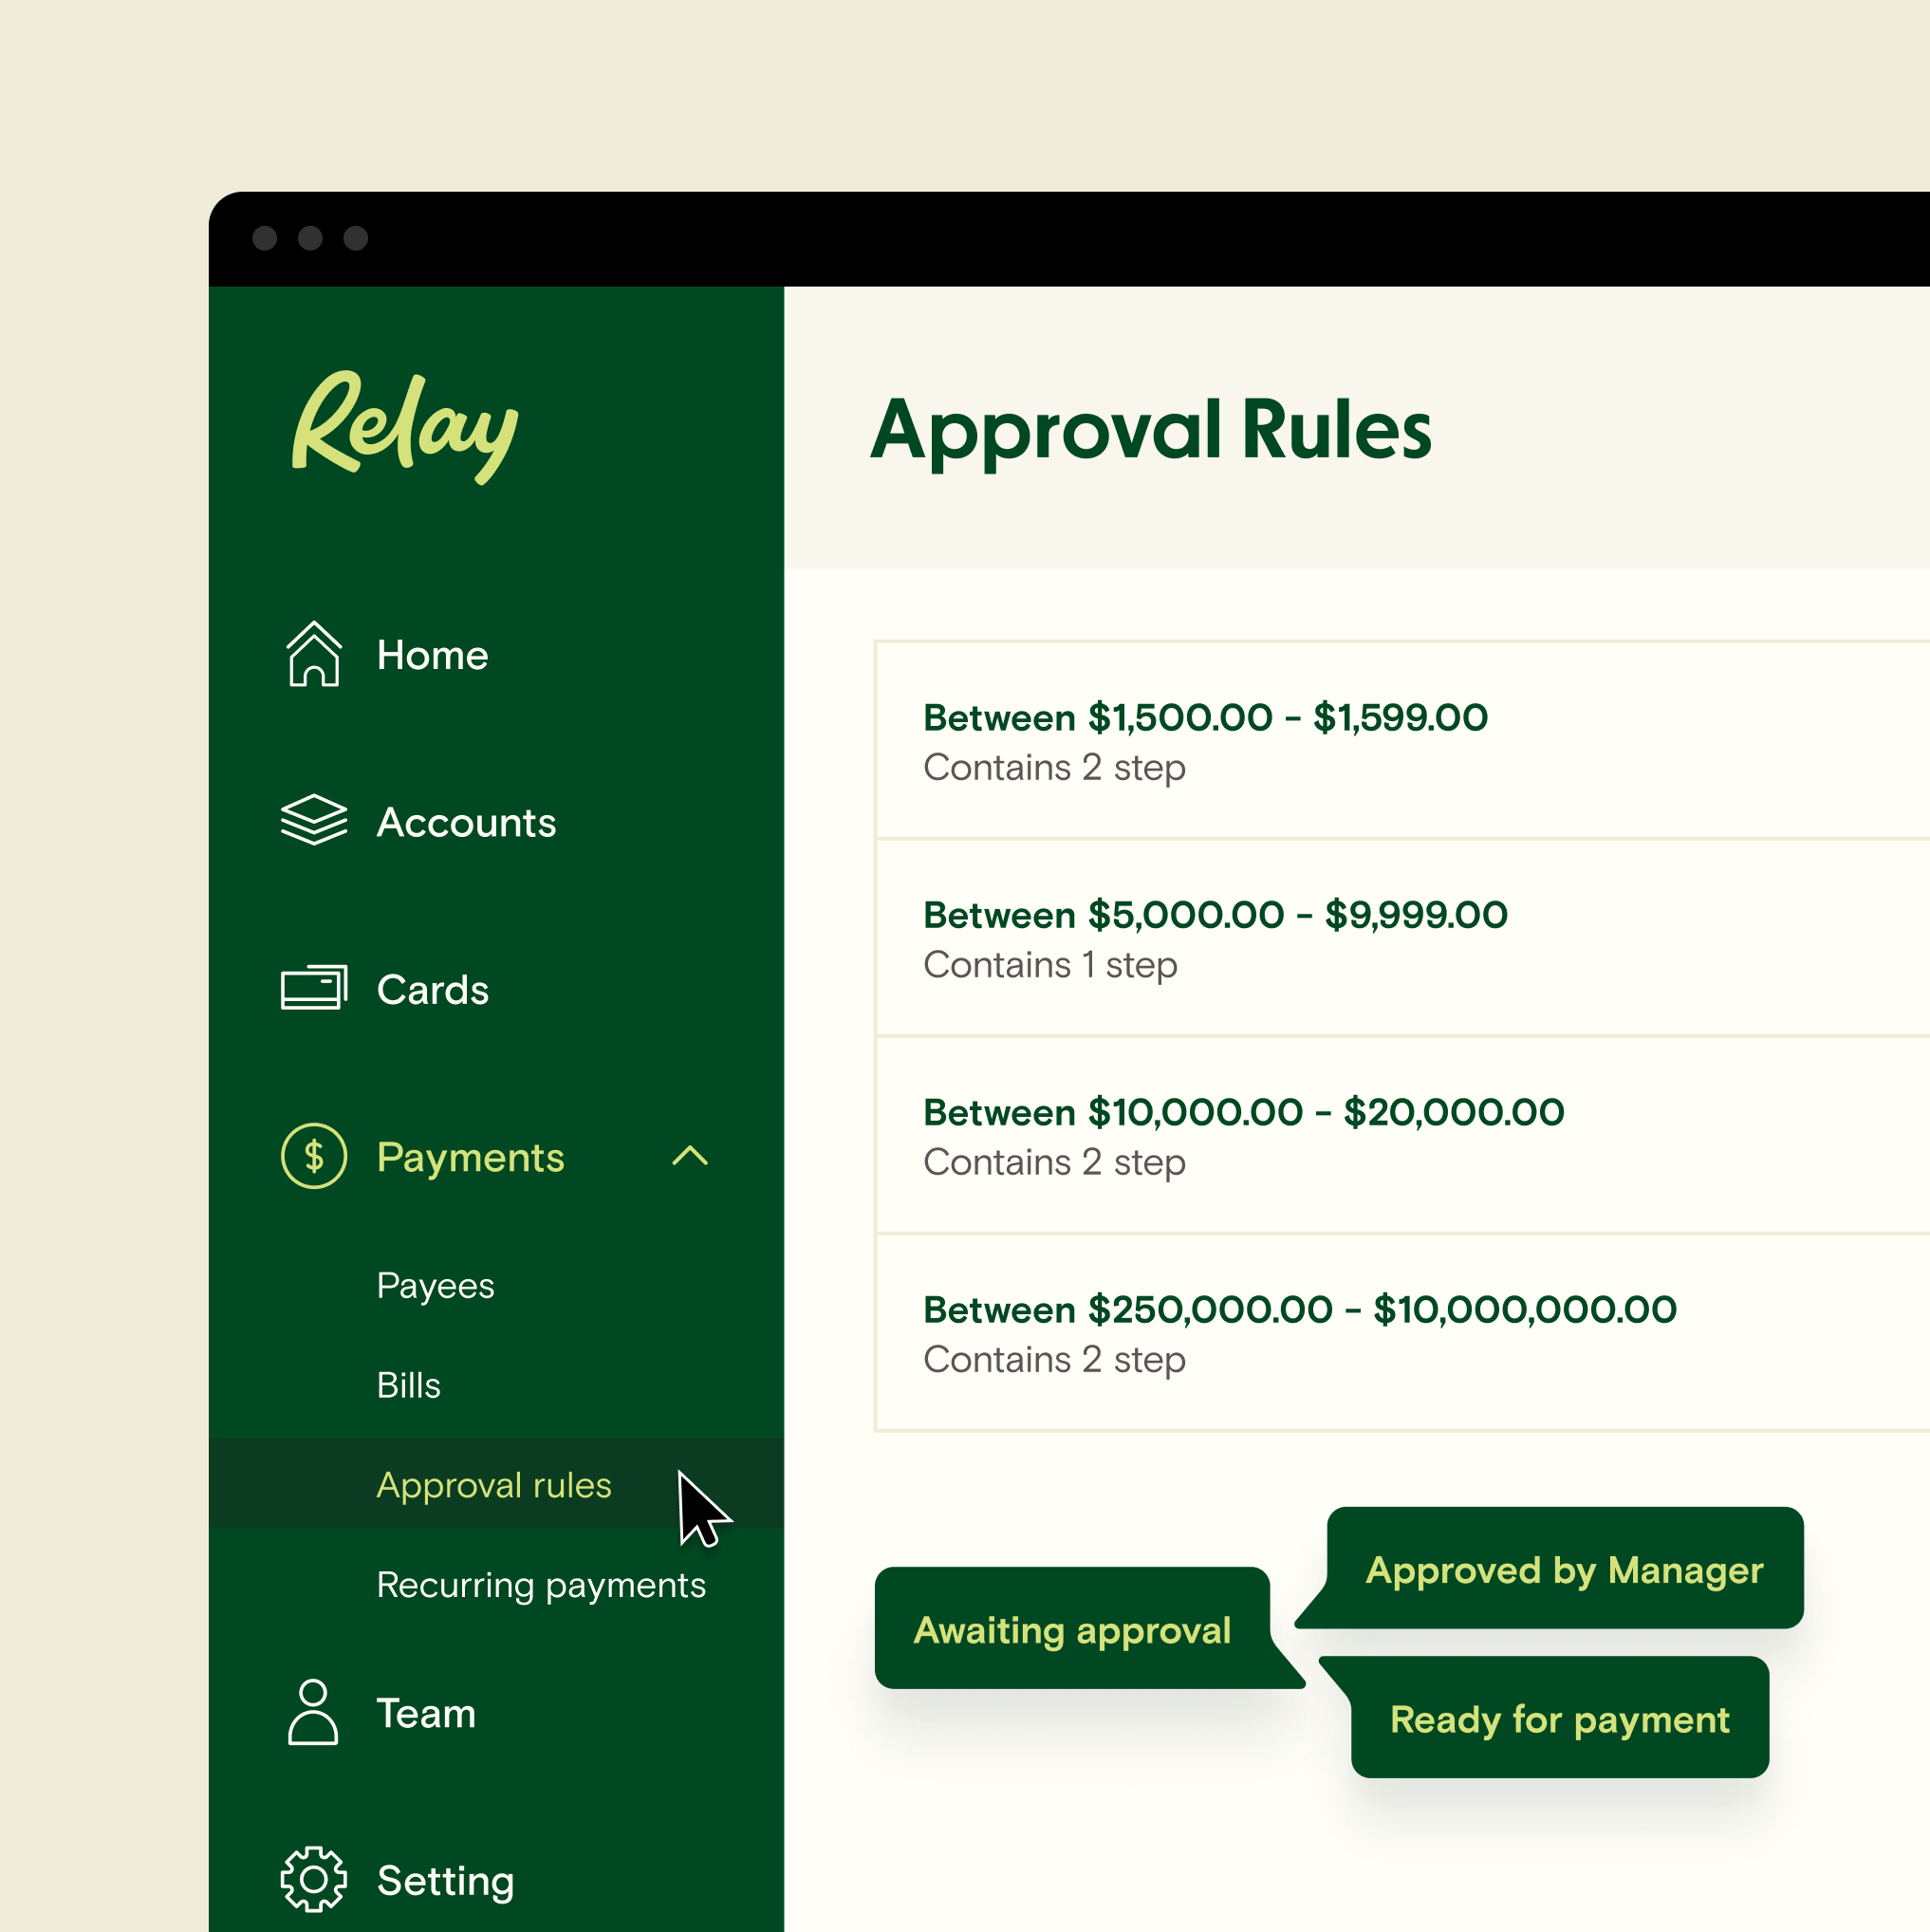 List of approval rules requiring 1 or 2 approvals based on dollar amounts.